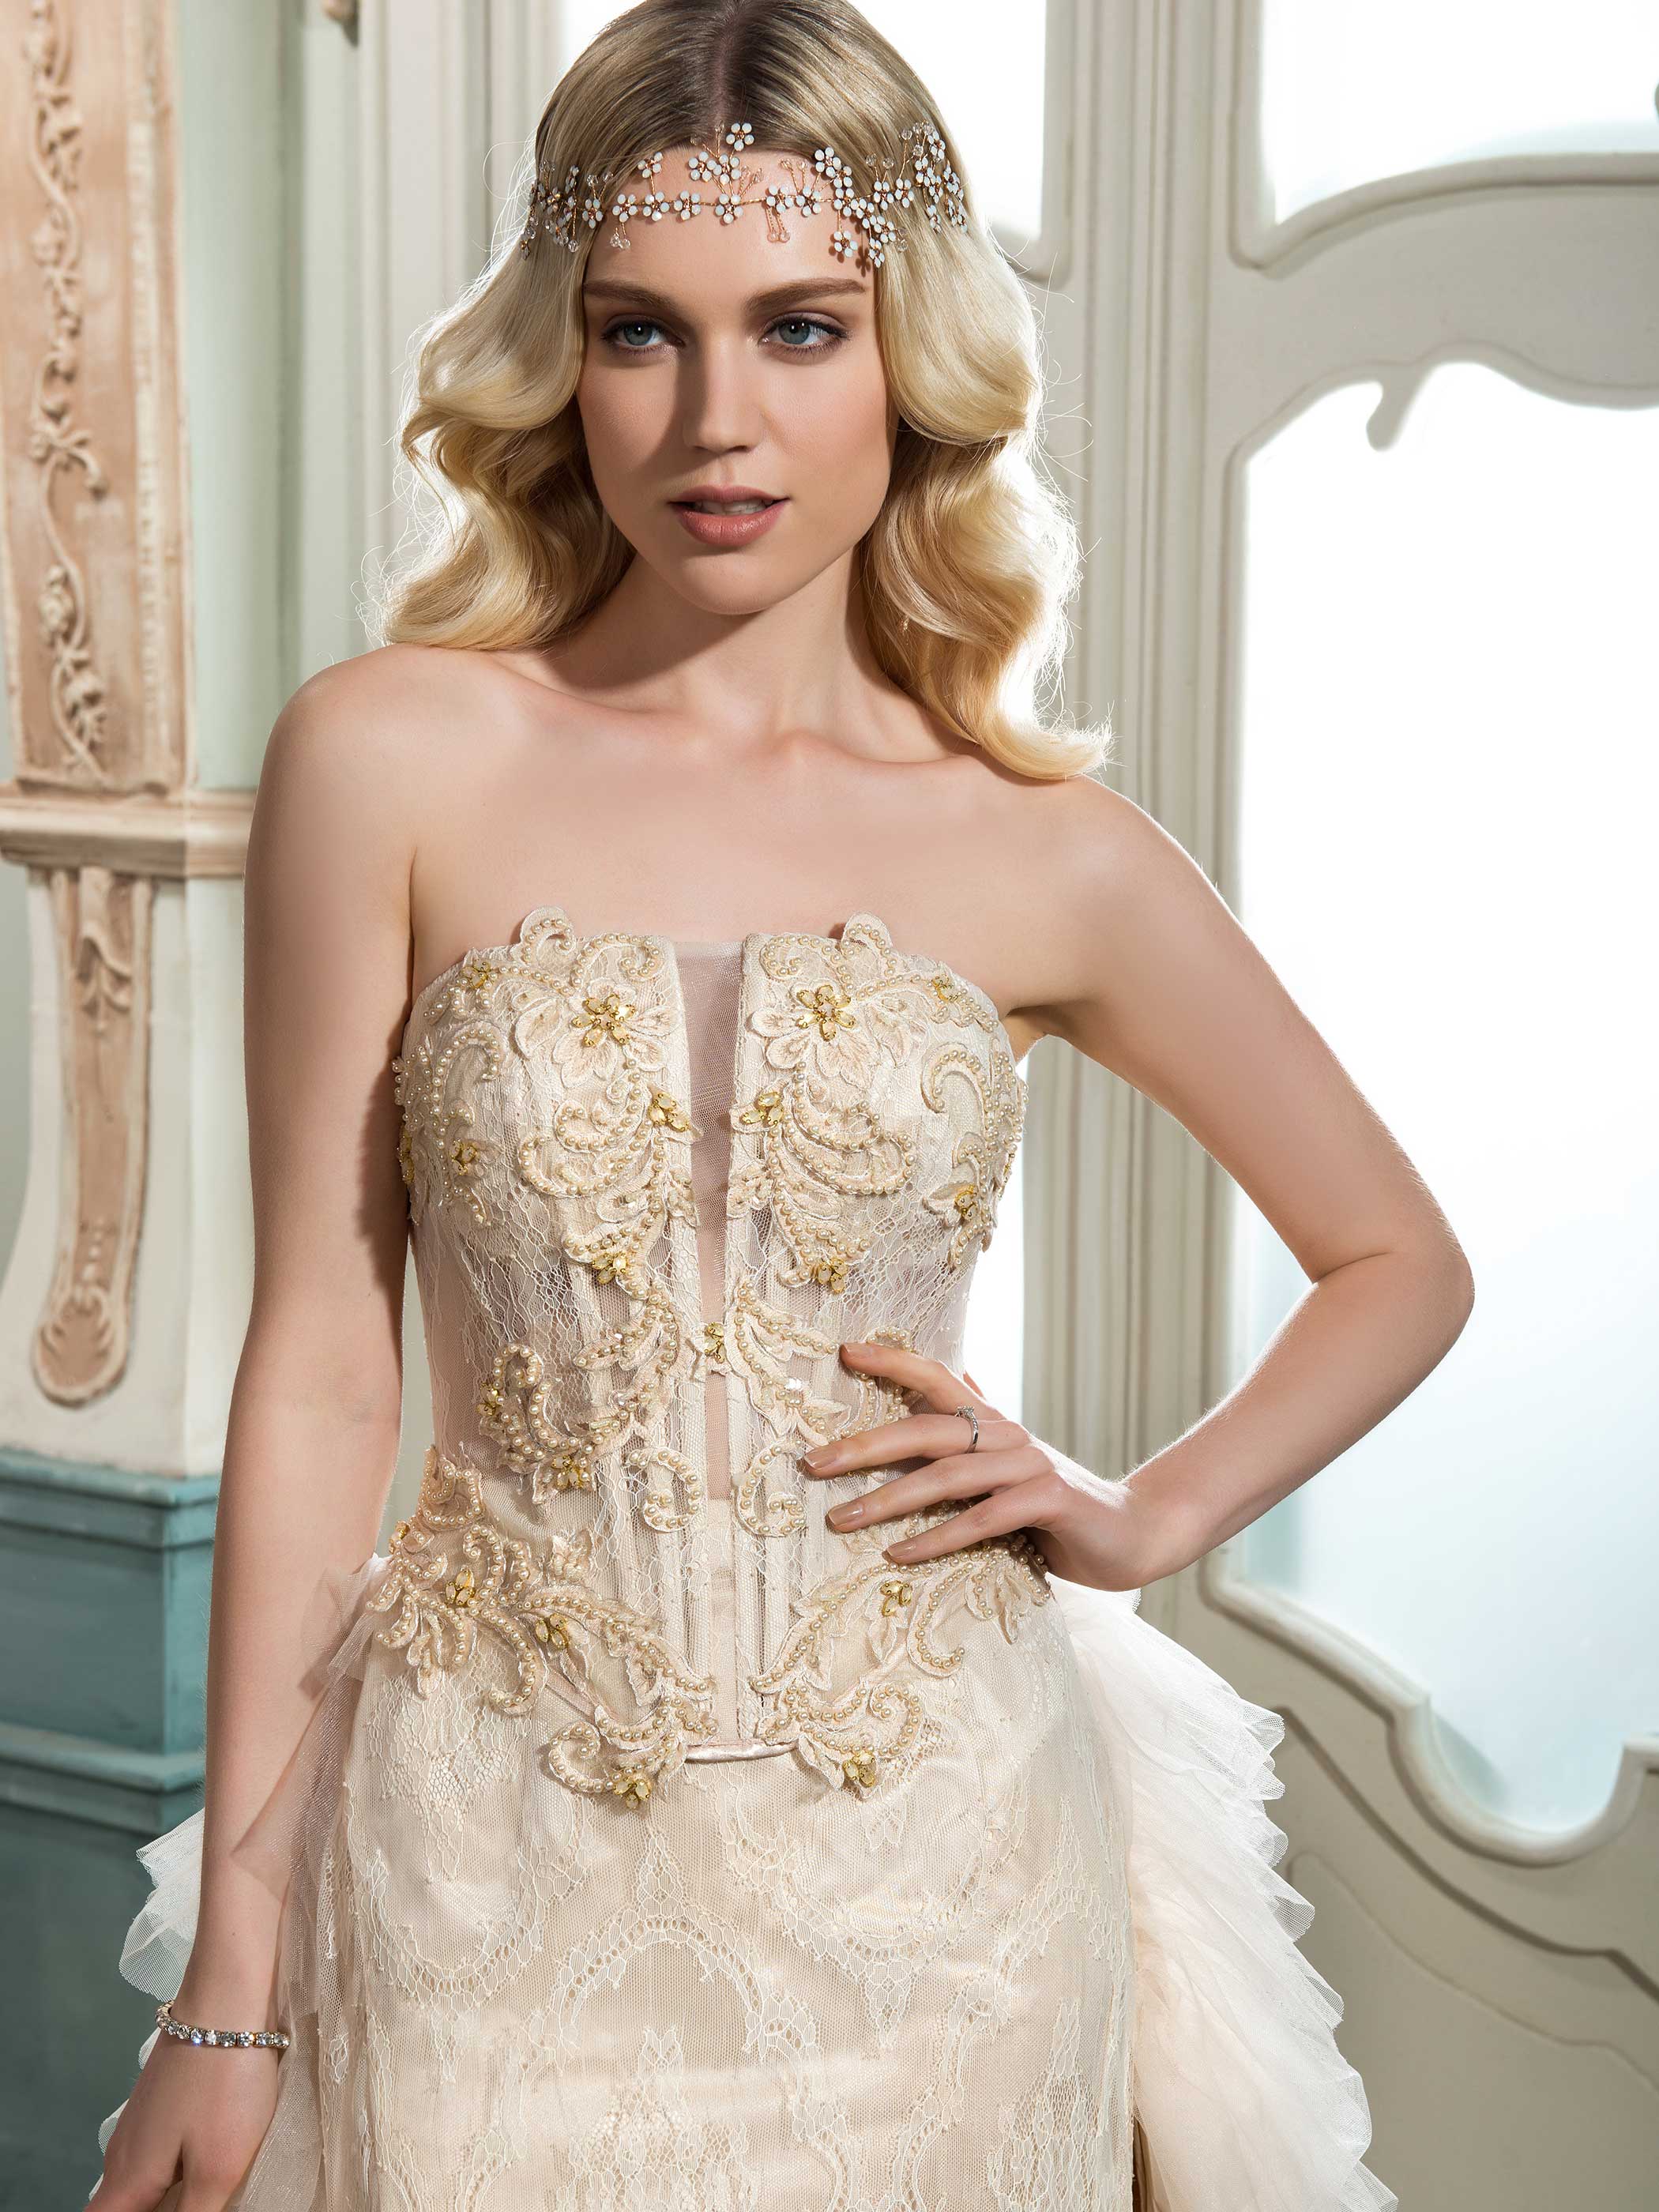 Ericdress Strapless Beaded Lace Wedding Dress with Train